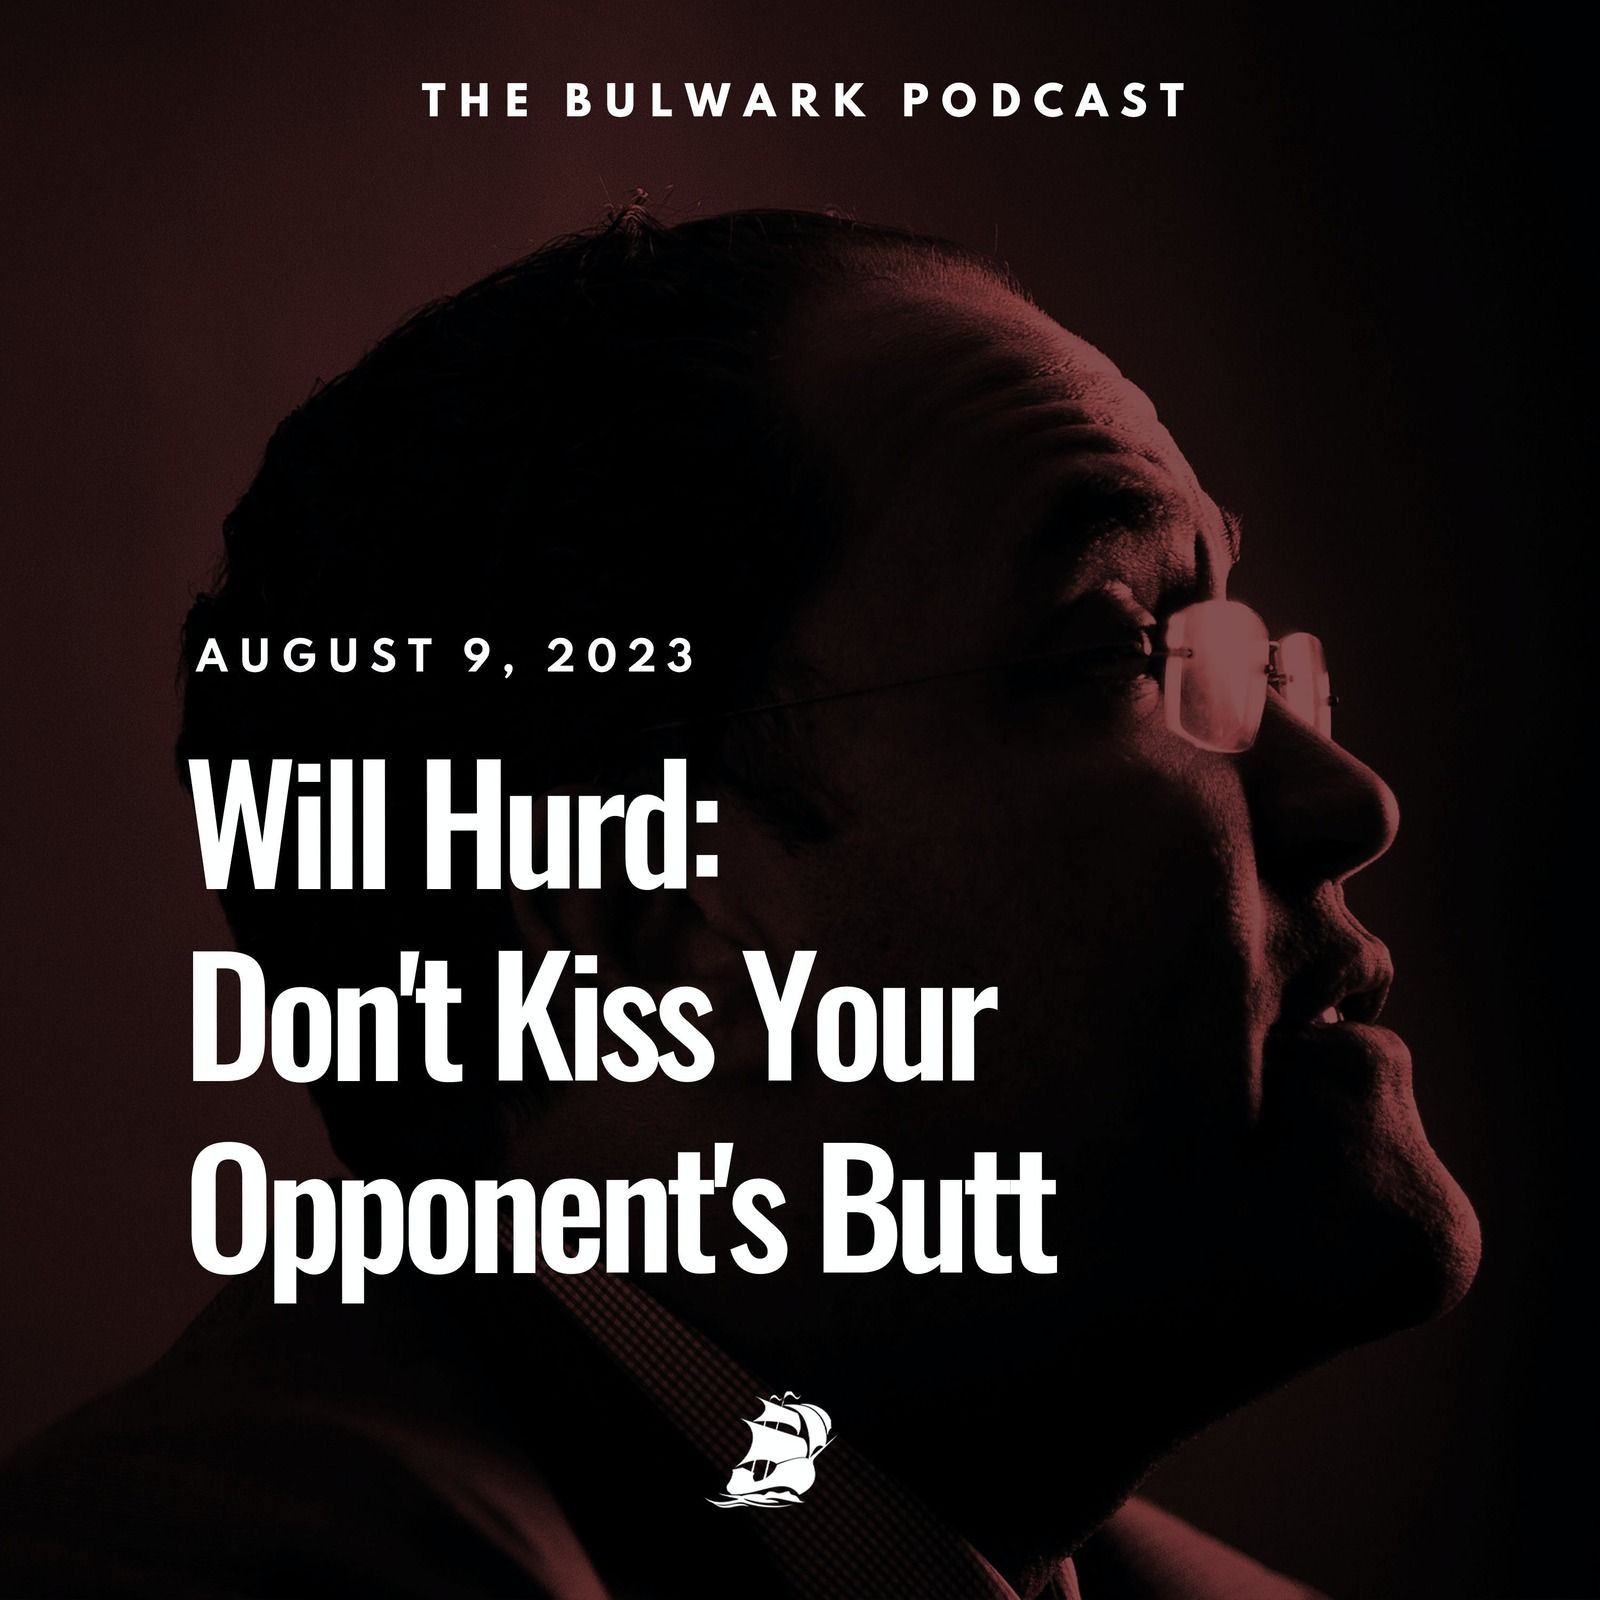 Will Hurd: Don't Kiss Your Opponent's Butt by The Bulwark Podcast